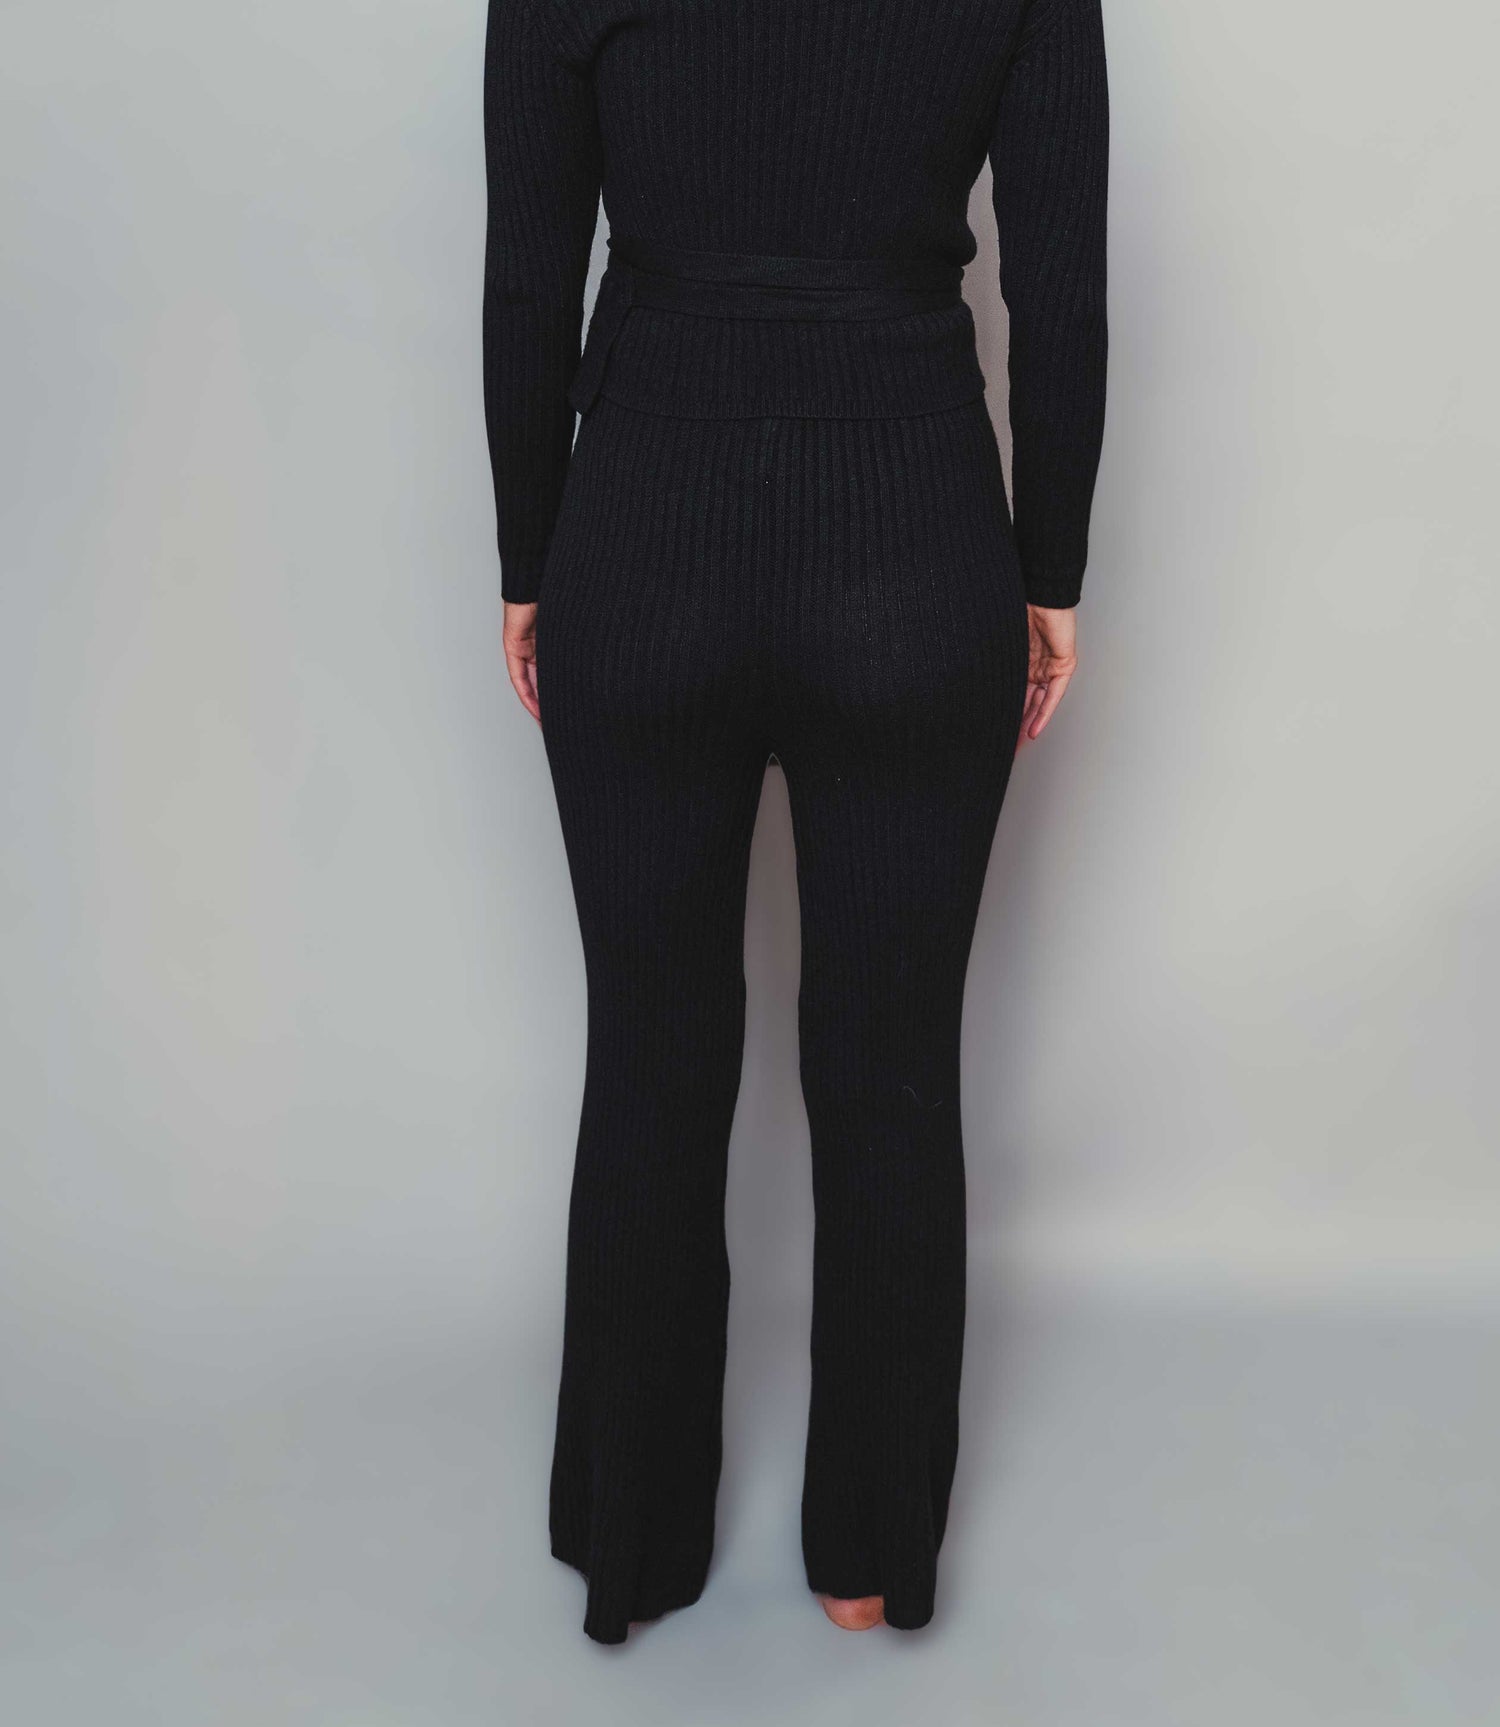 Black Knitted Trousers